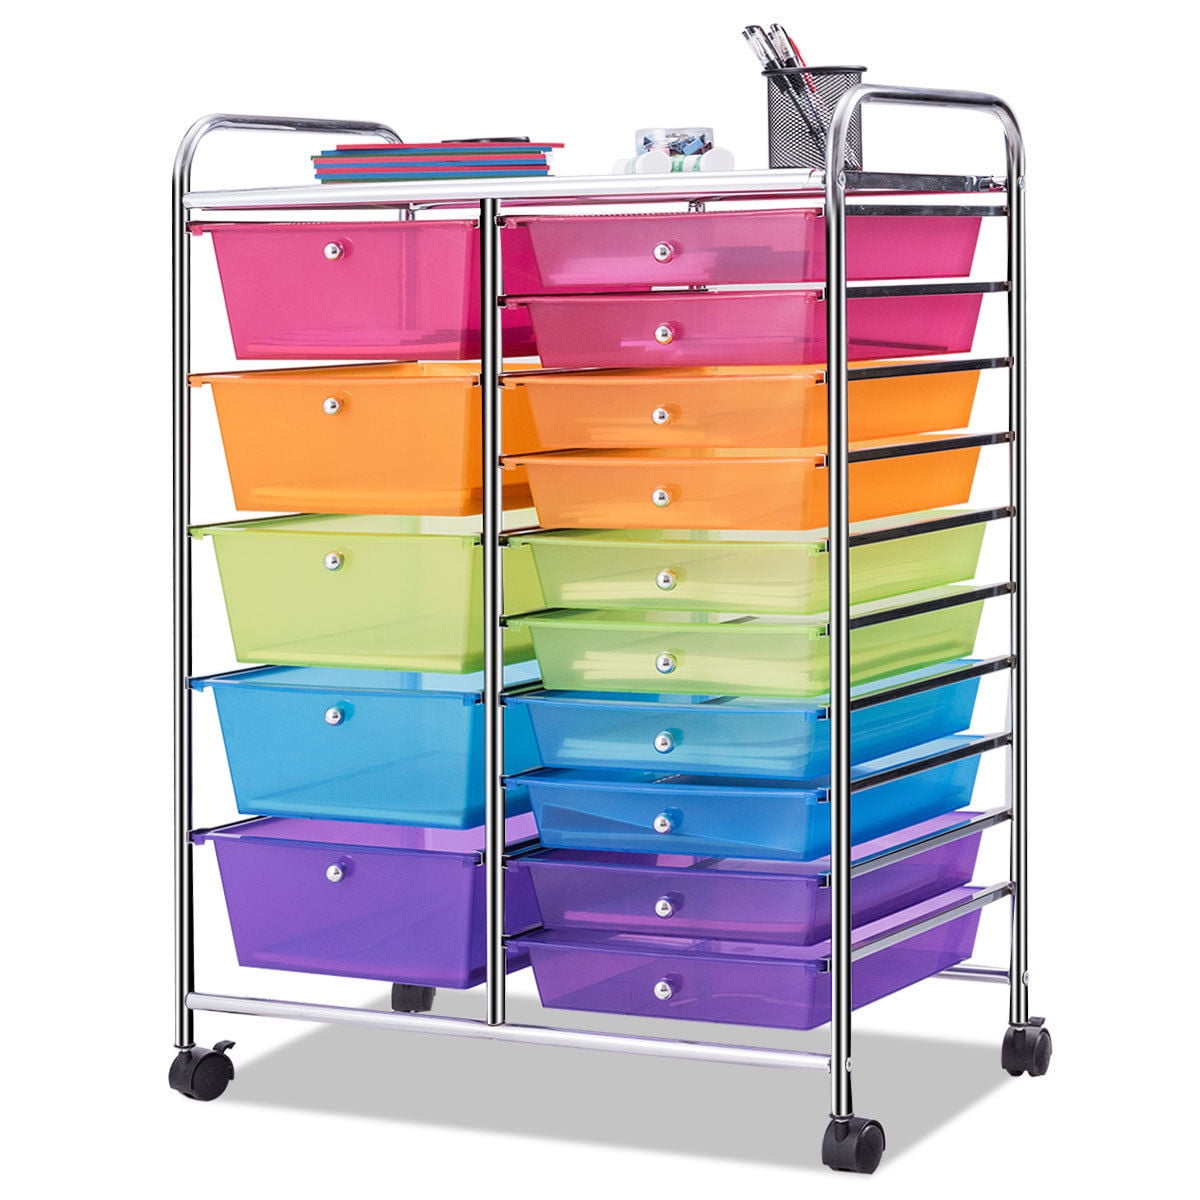 Plastic Storage Drawers on Wheels Mulitcolor Mobile Utility Cart Palette Organizer for School Office Home Beauty Salon Spa BestComfort Rolling Cart with 4 Drawers and 2 Shelves 